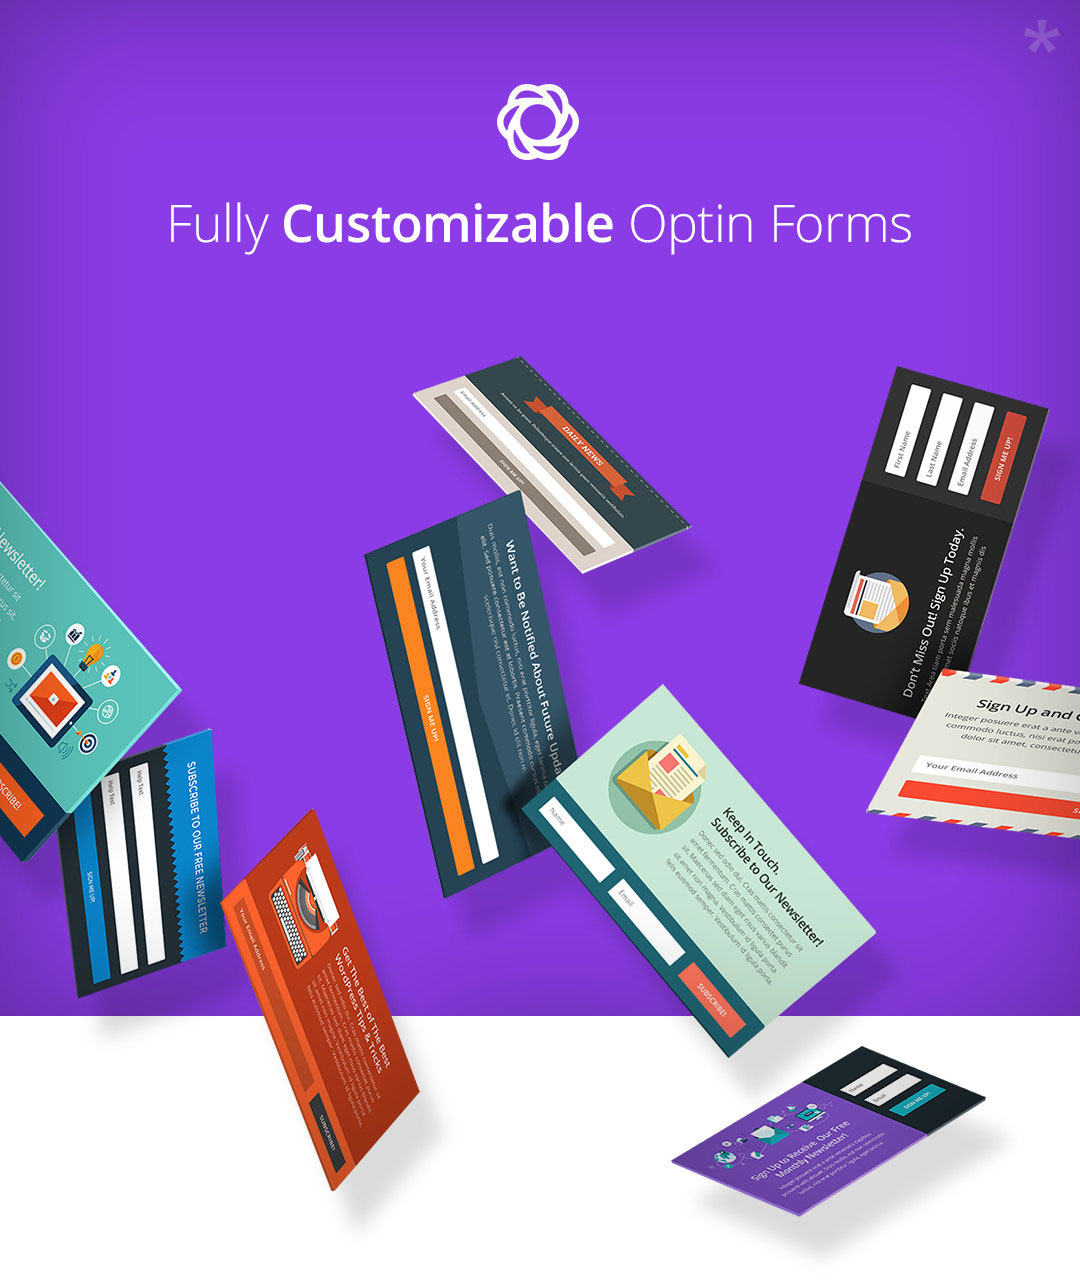 email form design templates 